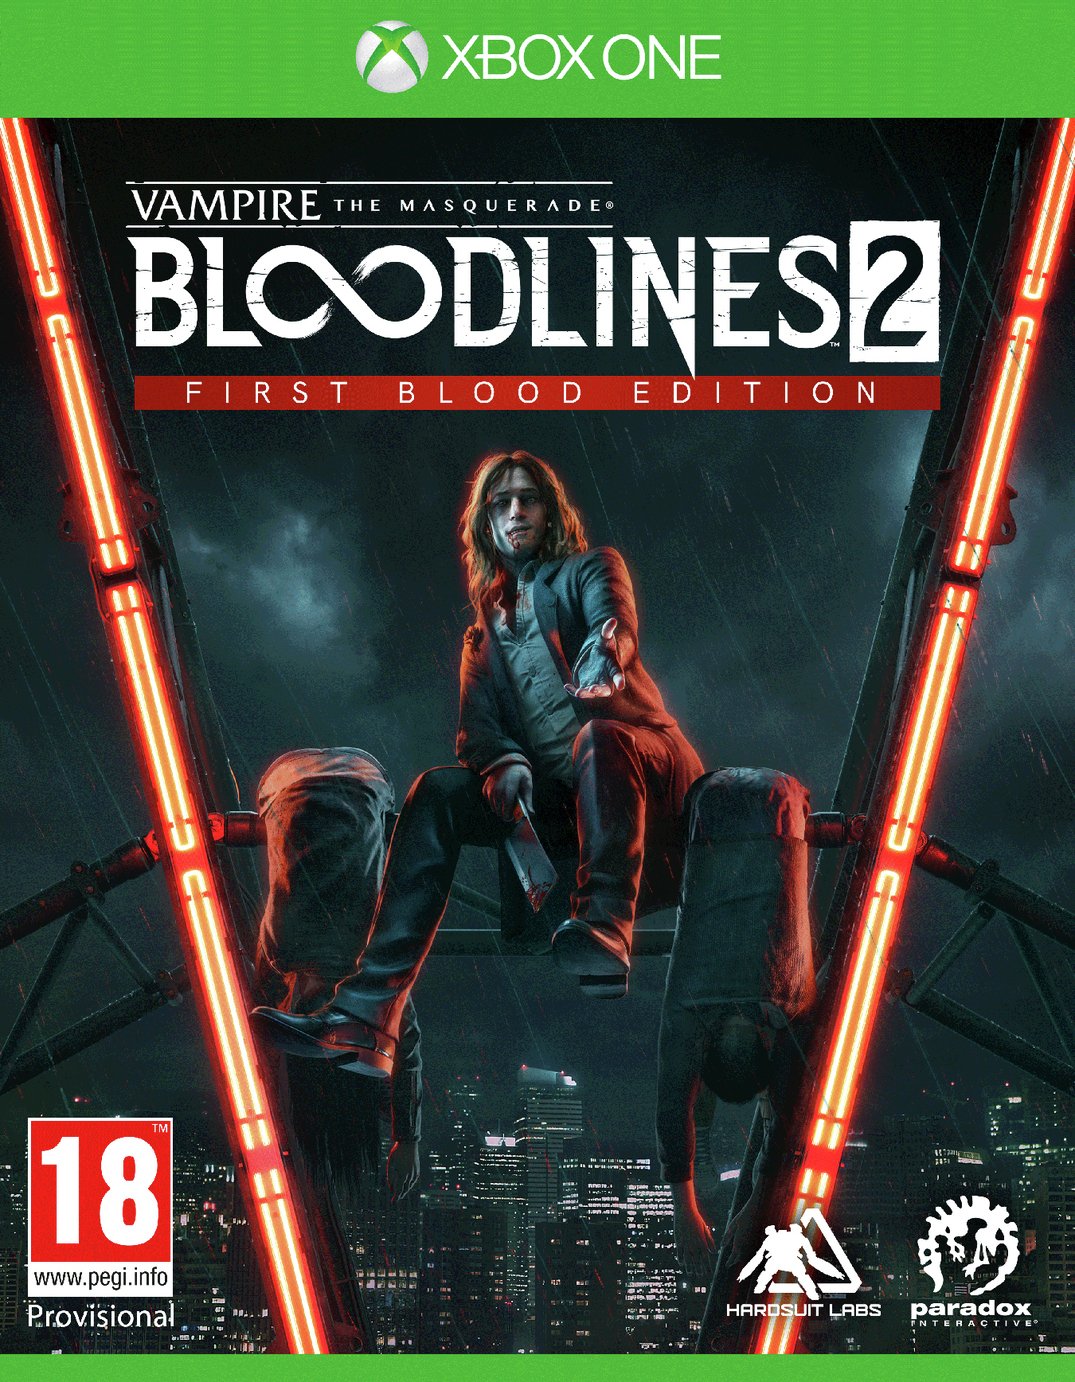 Vampire: The Masquerade Bloodlines 2 Xbox One Pre-Order Game Review